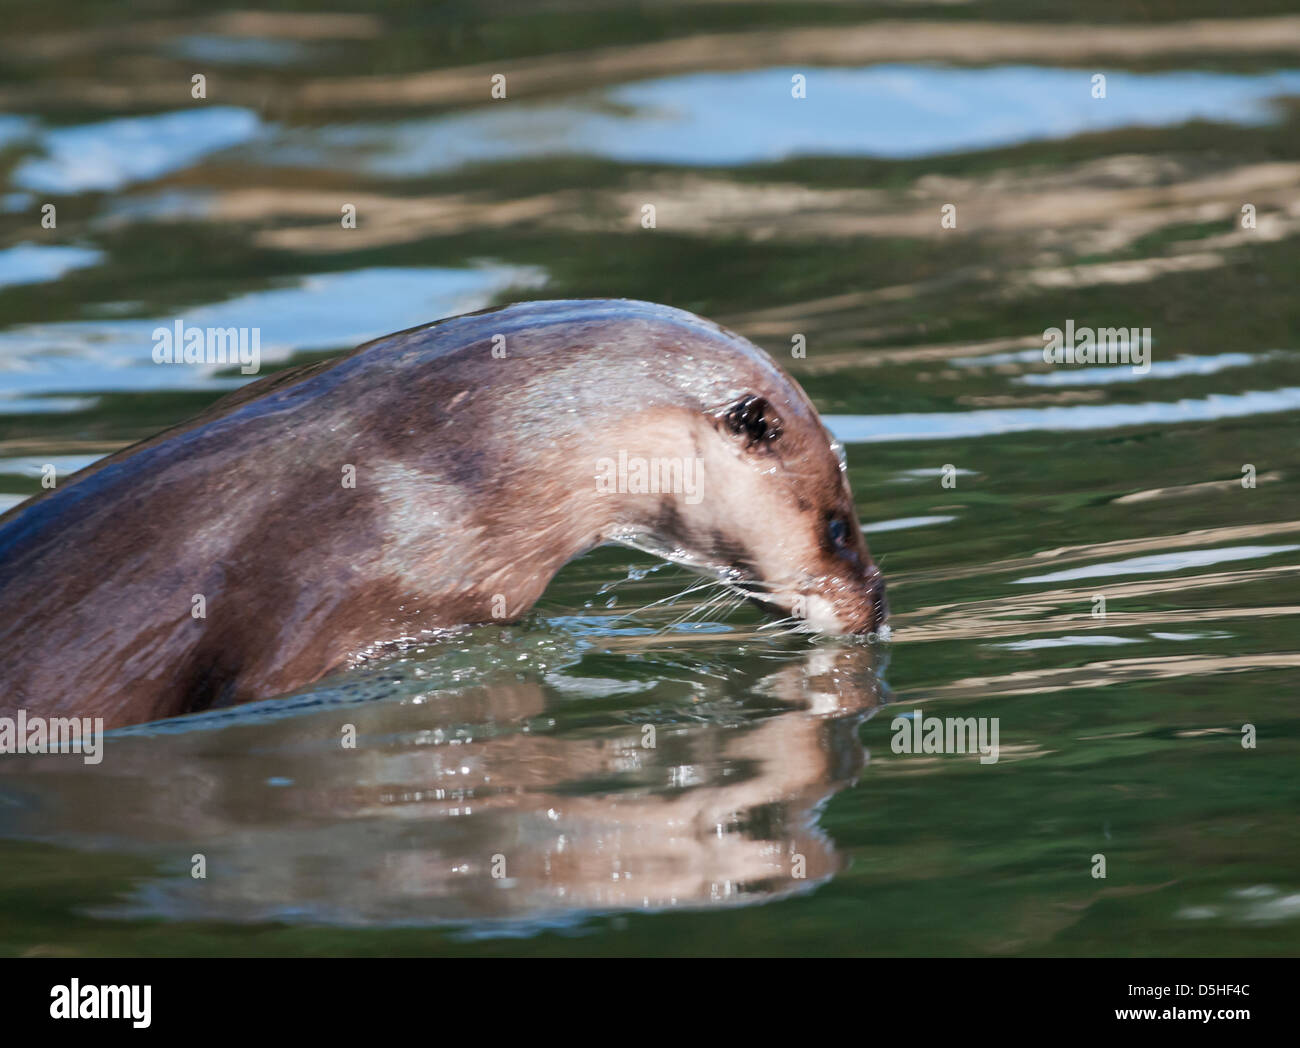 Wild European Otter Lutra lutra swimming in Norfolk river Stock Photo